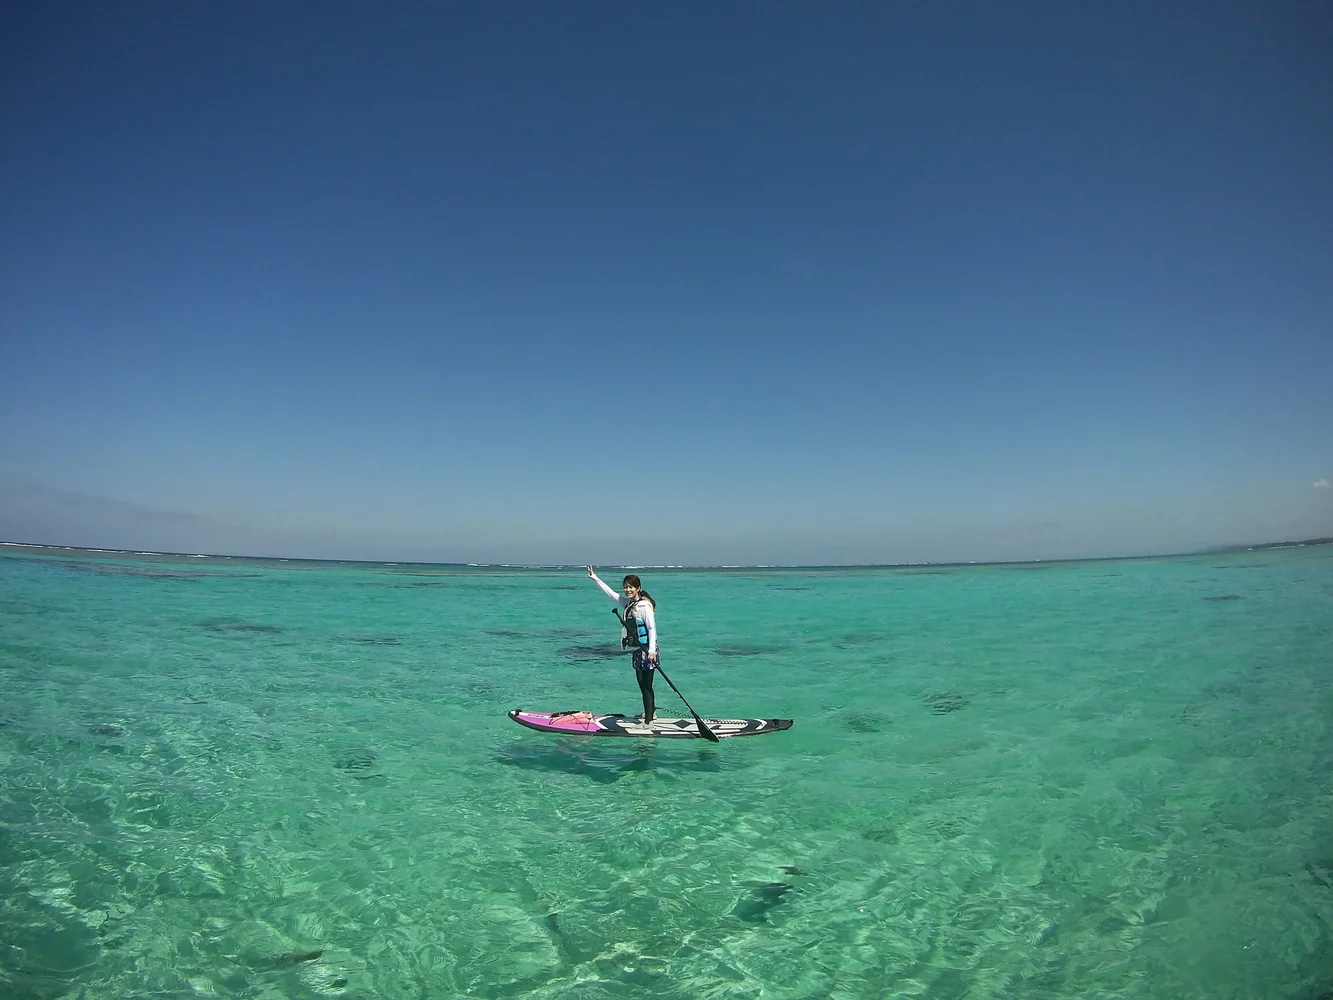 Visit the Bise-no-Warumi Power Spot in Okinawa by SUP